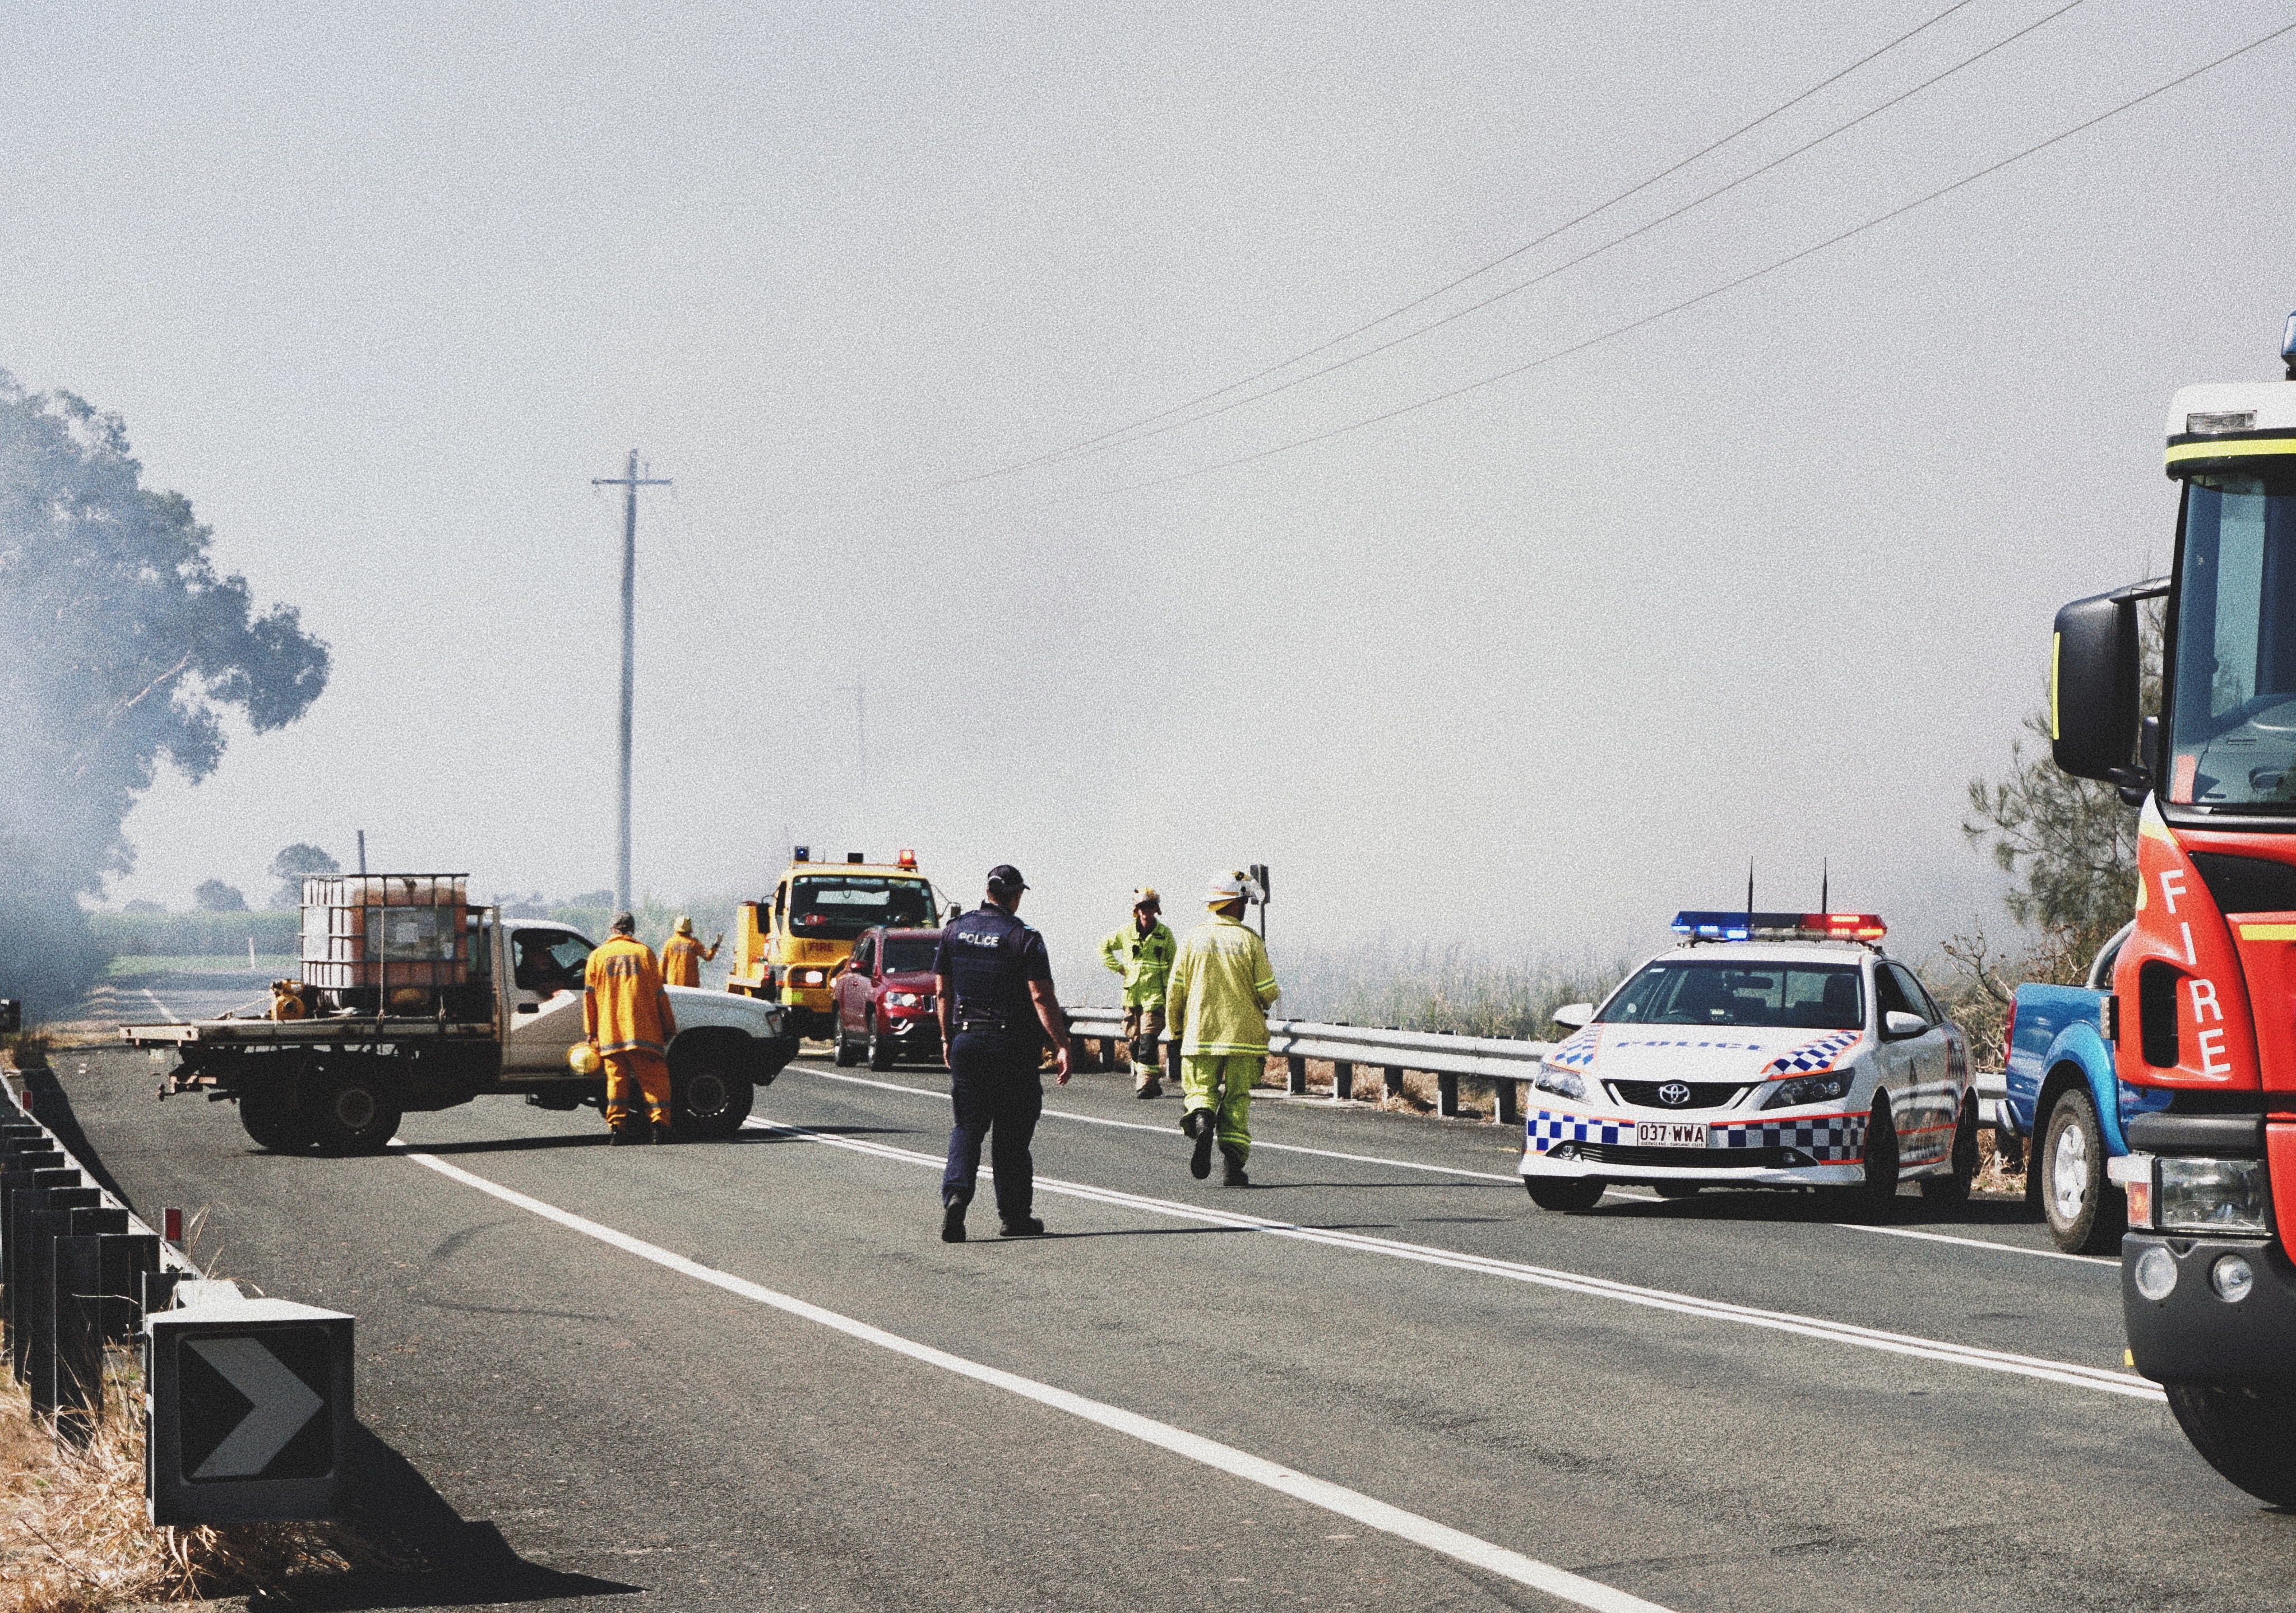 Image of a fire truck, police officers and a police car responding to an incident on a road